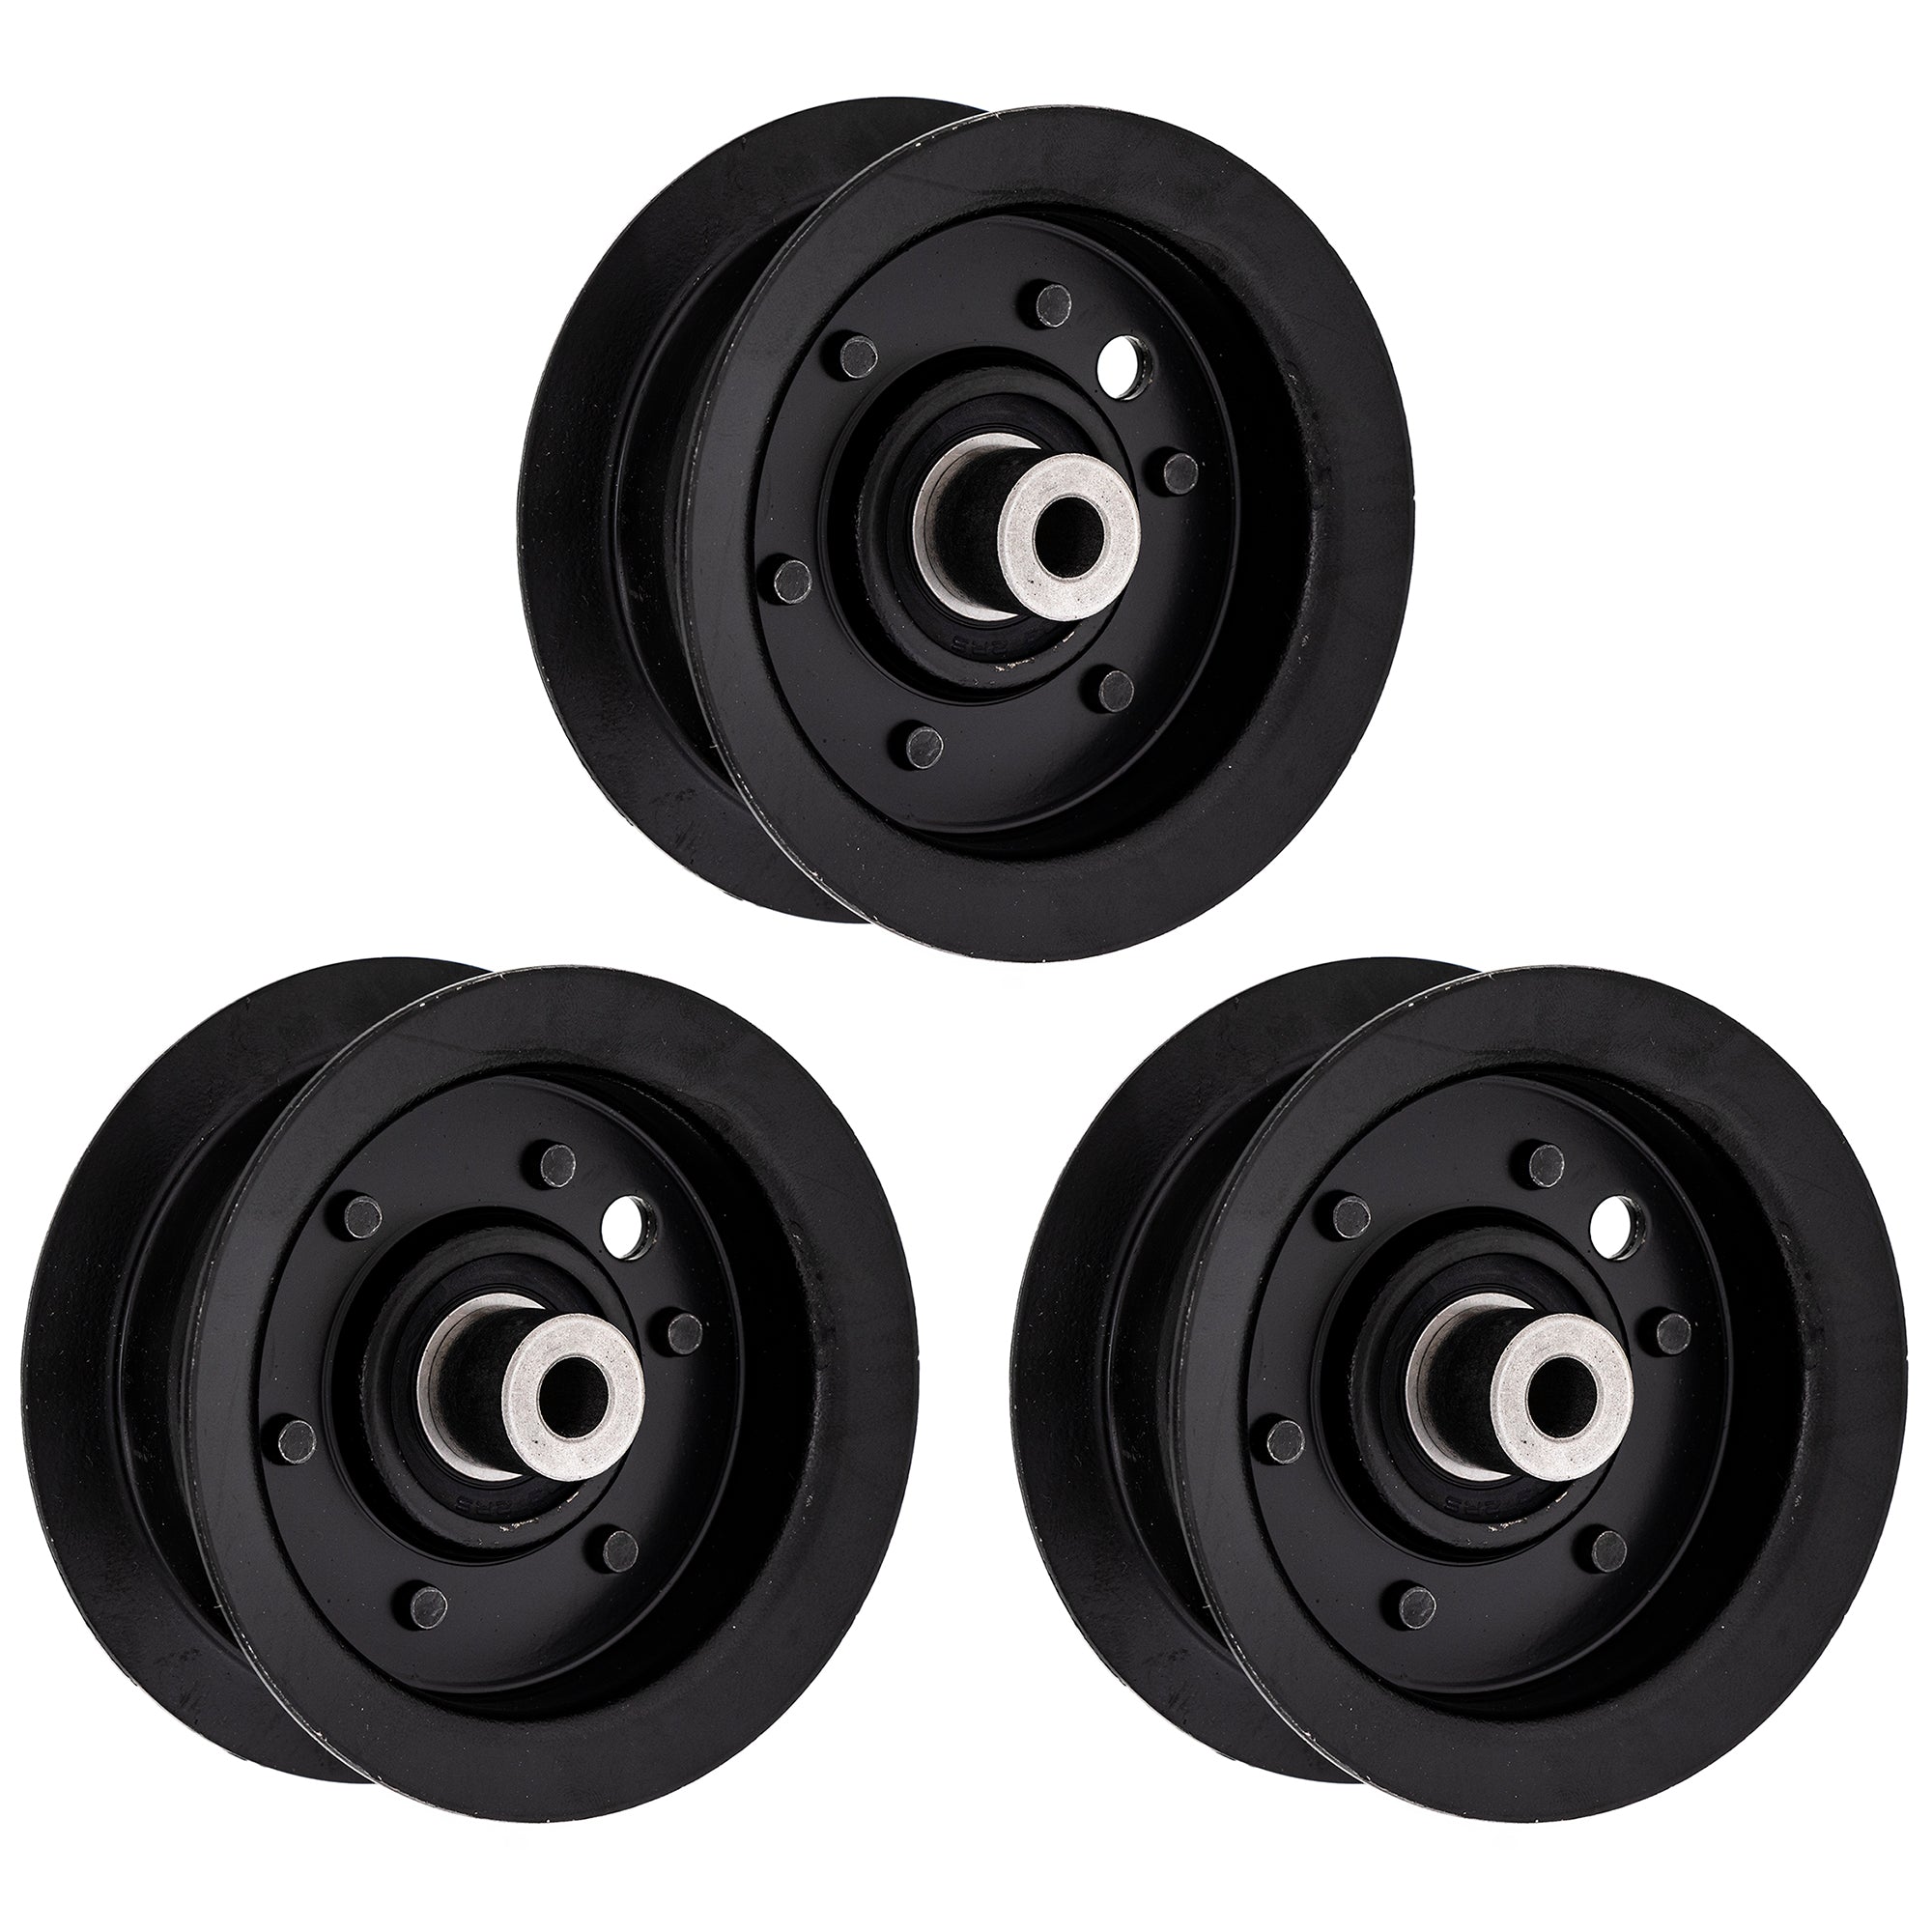 Flat Idler Pulley Set 3-Pack for Toro Exmark TimeCutter Recycling Quest Horse 88-5630 8TEN 810-CID2252L